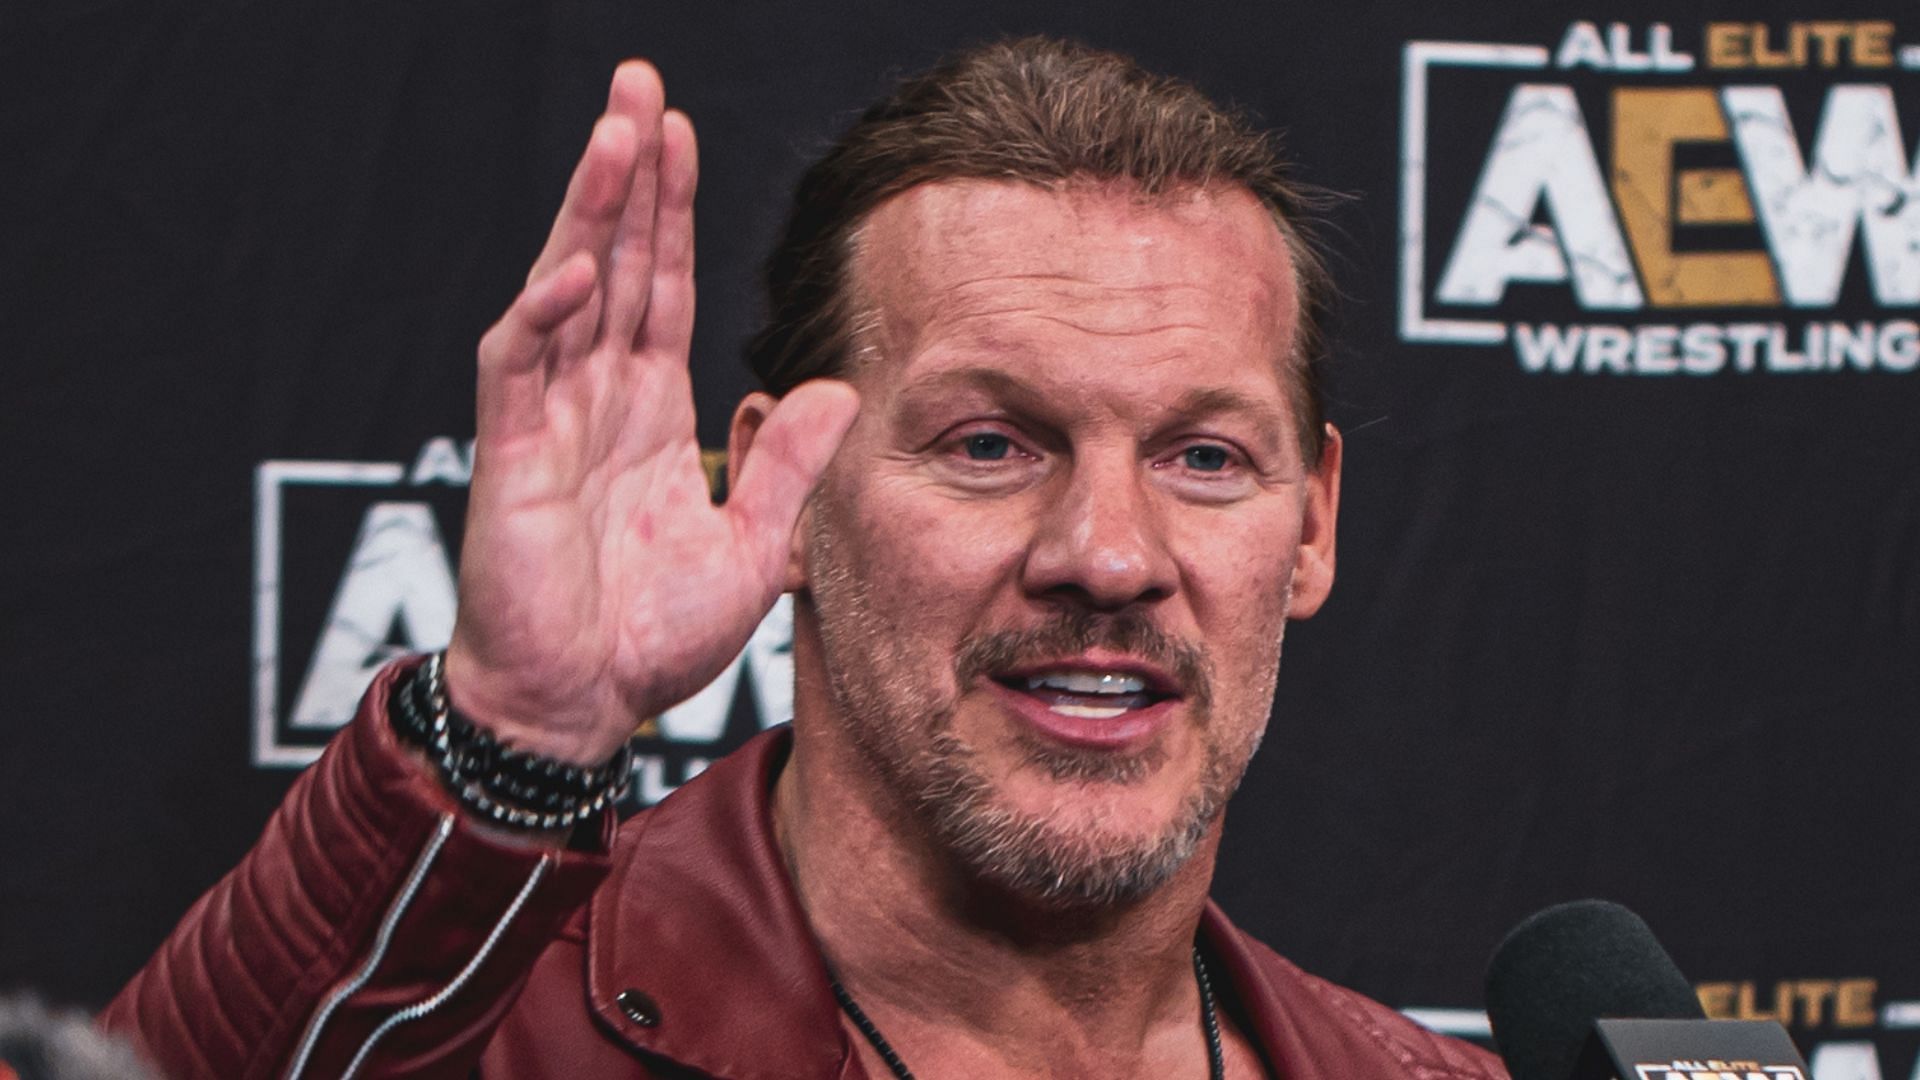 Chris Jericho has detailed the most important aspect of the wrestling business